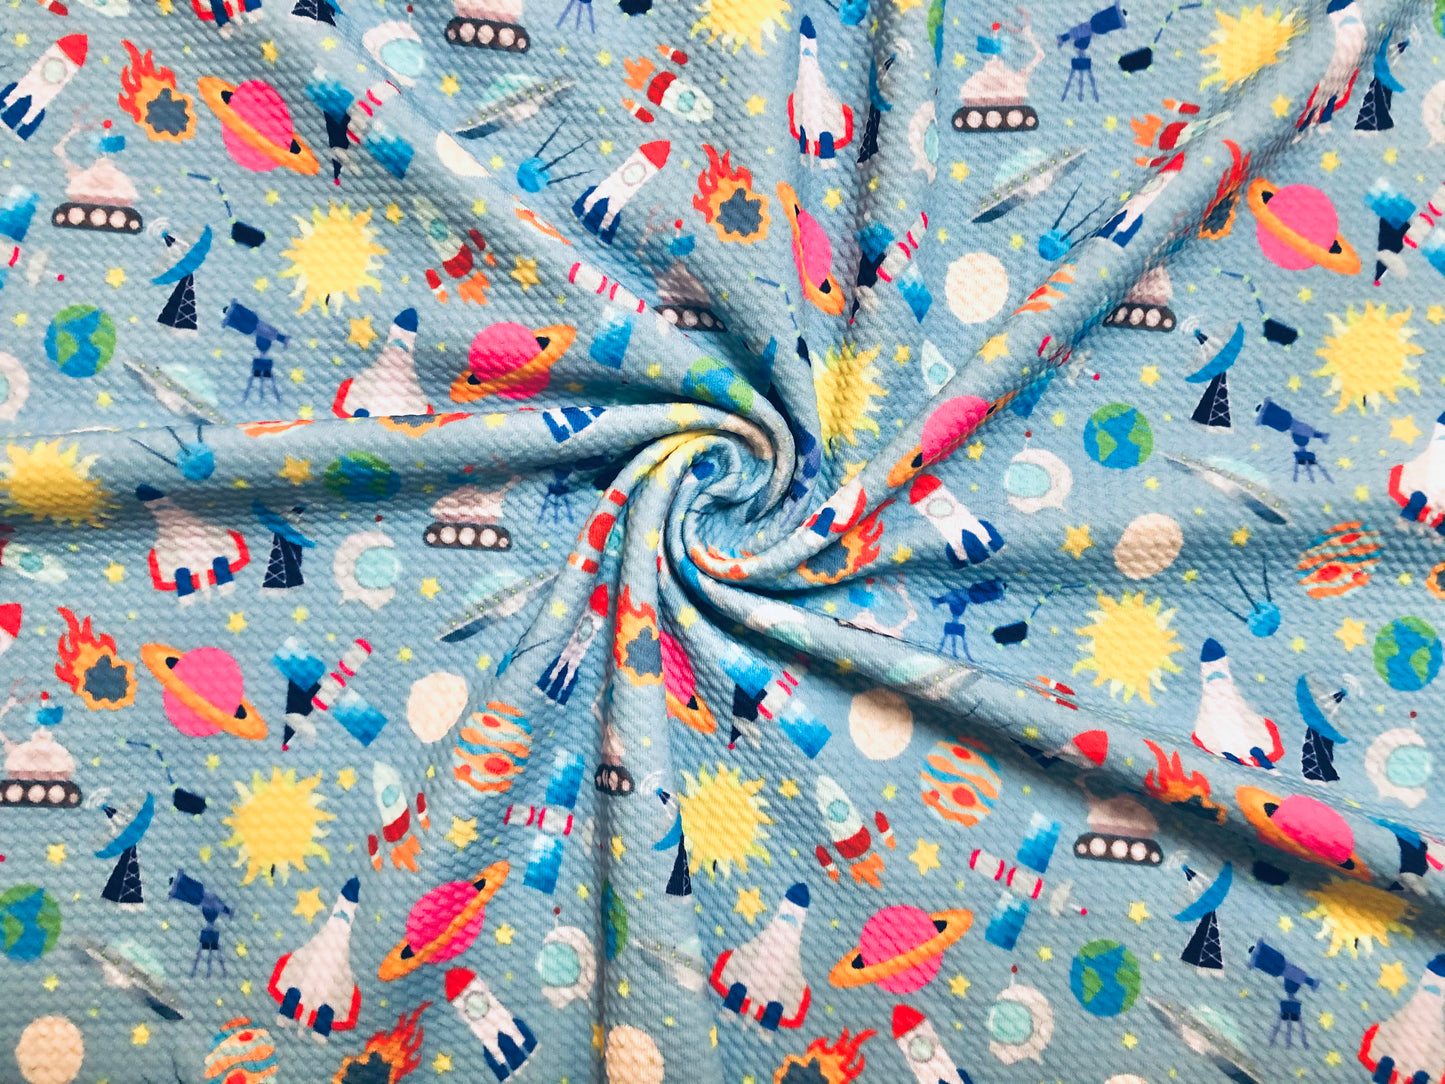 Bullet Knit Printed Fabric-Baby Blue Yellow Outer Space-BPR200-Sold by the Yard-Bulk Available